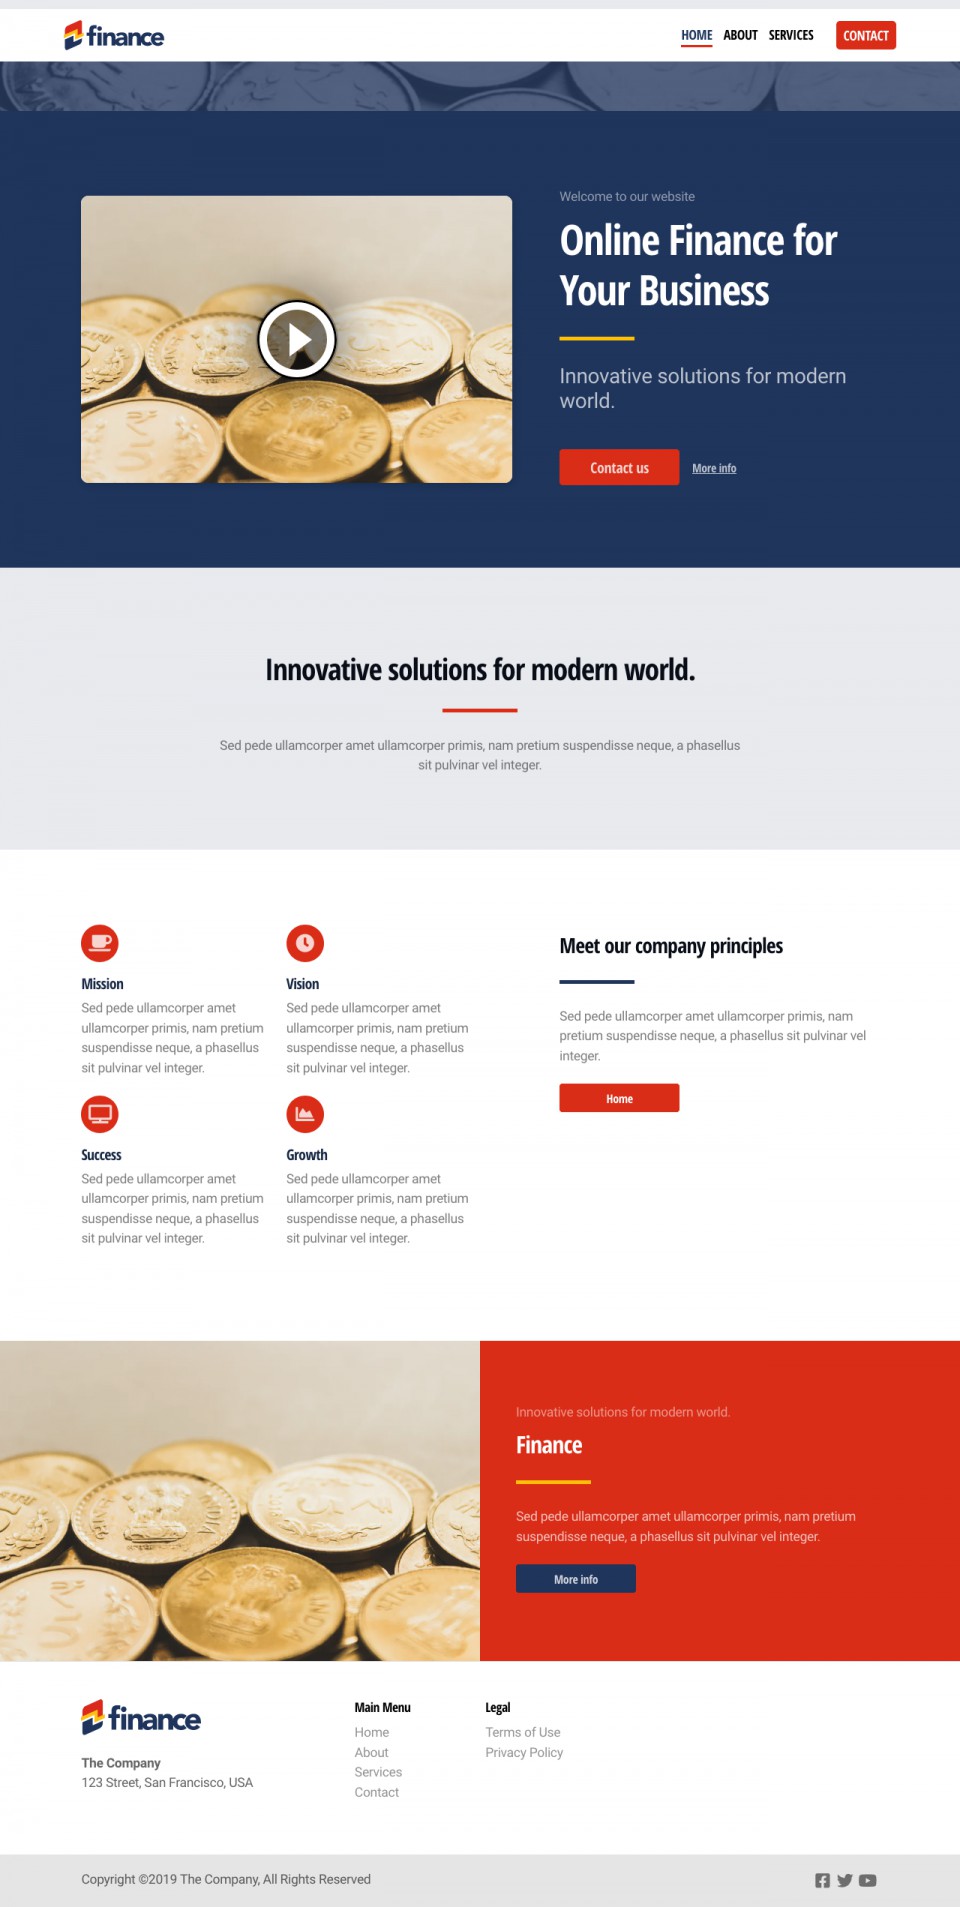 Finance Website Template - Ideal for finance businesses, accounting firms, bookkeeping services, financial advisors, and more